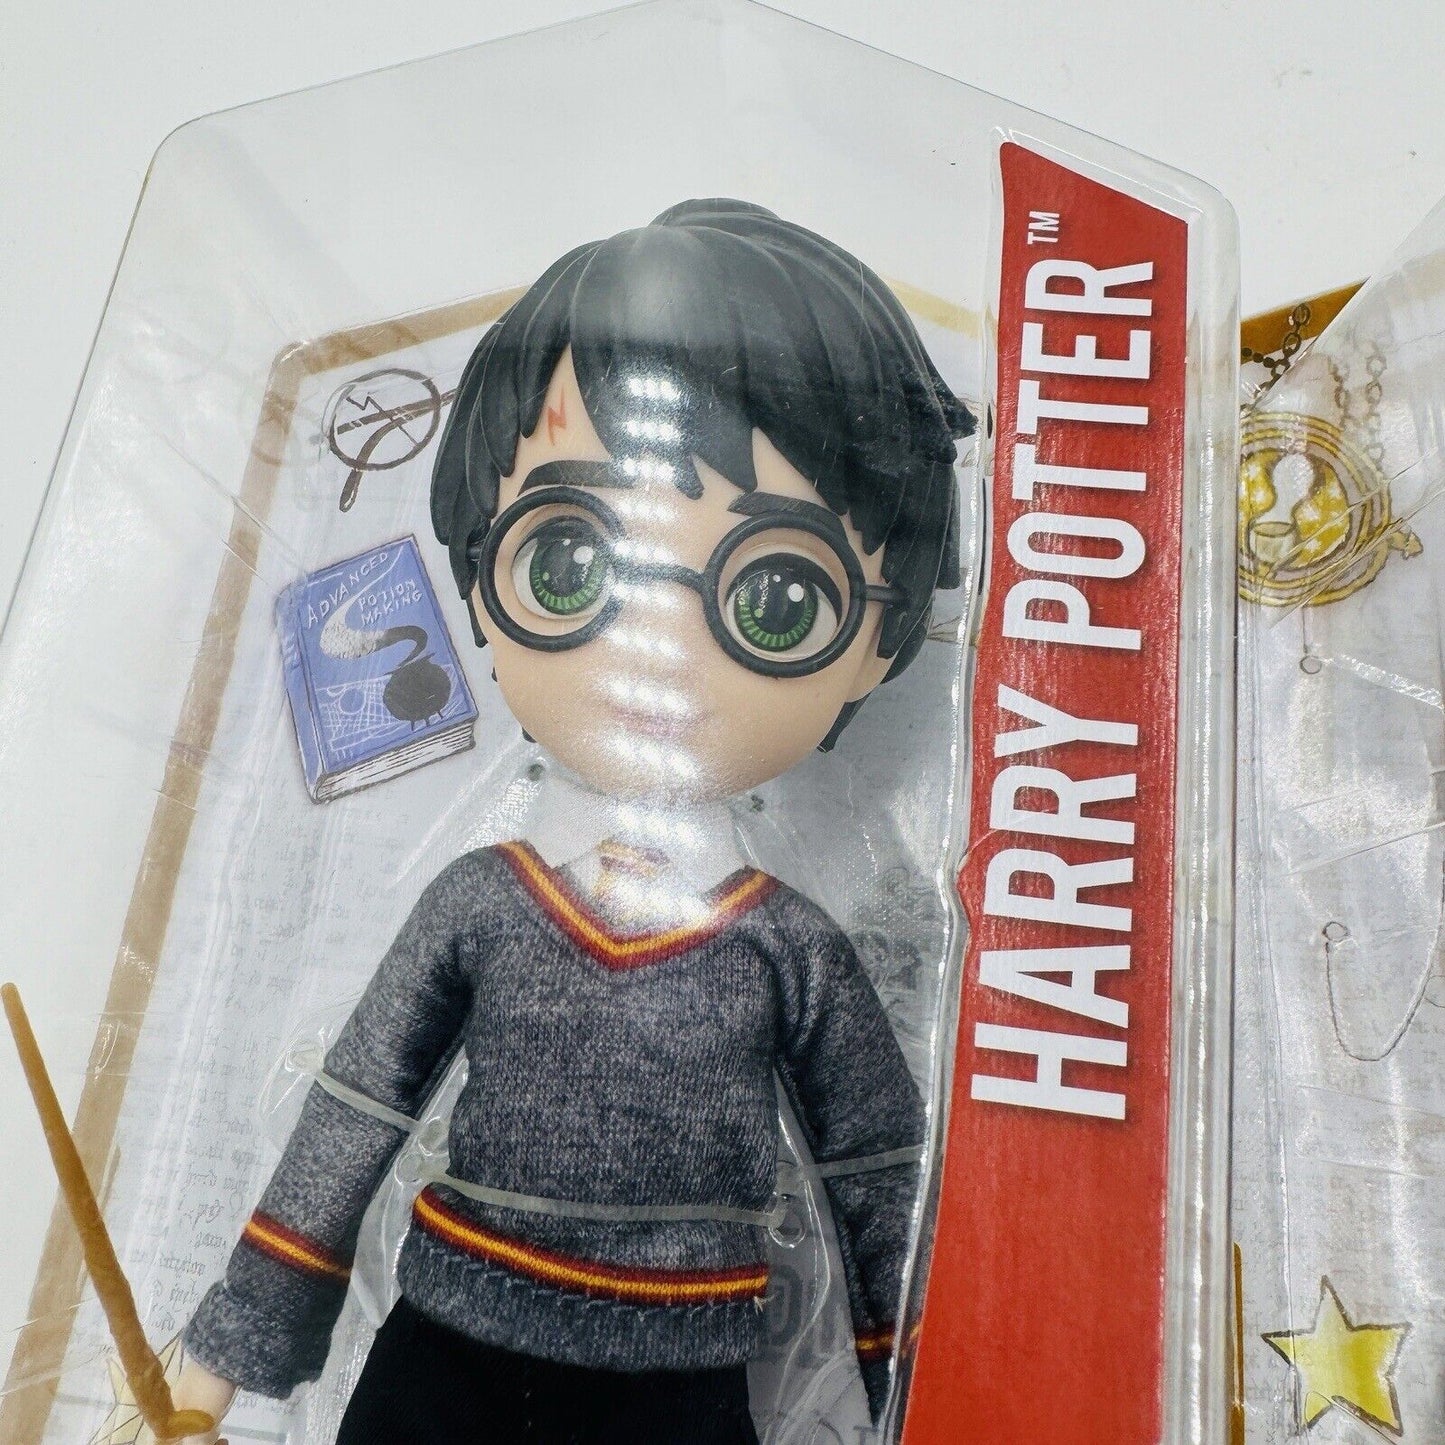 Wizarding World Harry Potter and Hermione Granger 8 inch Dolls Toys Collection